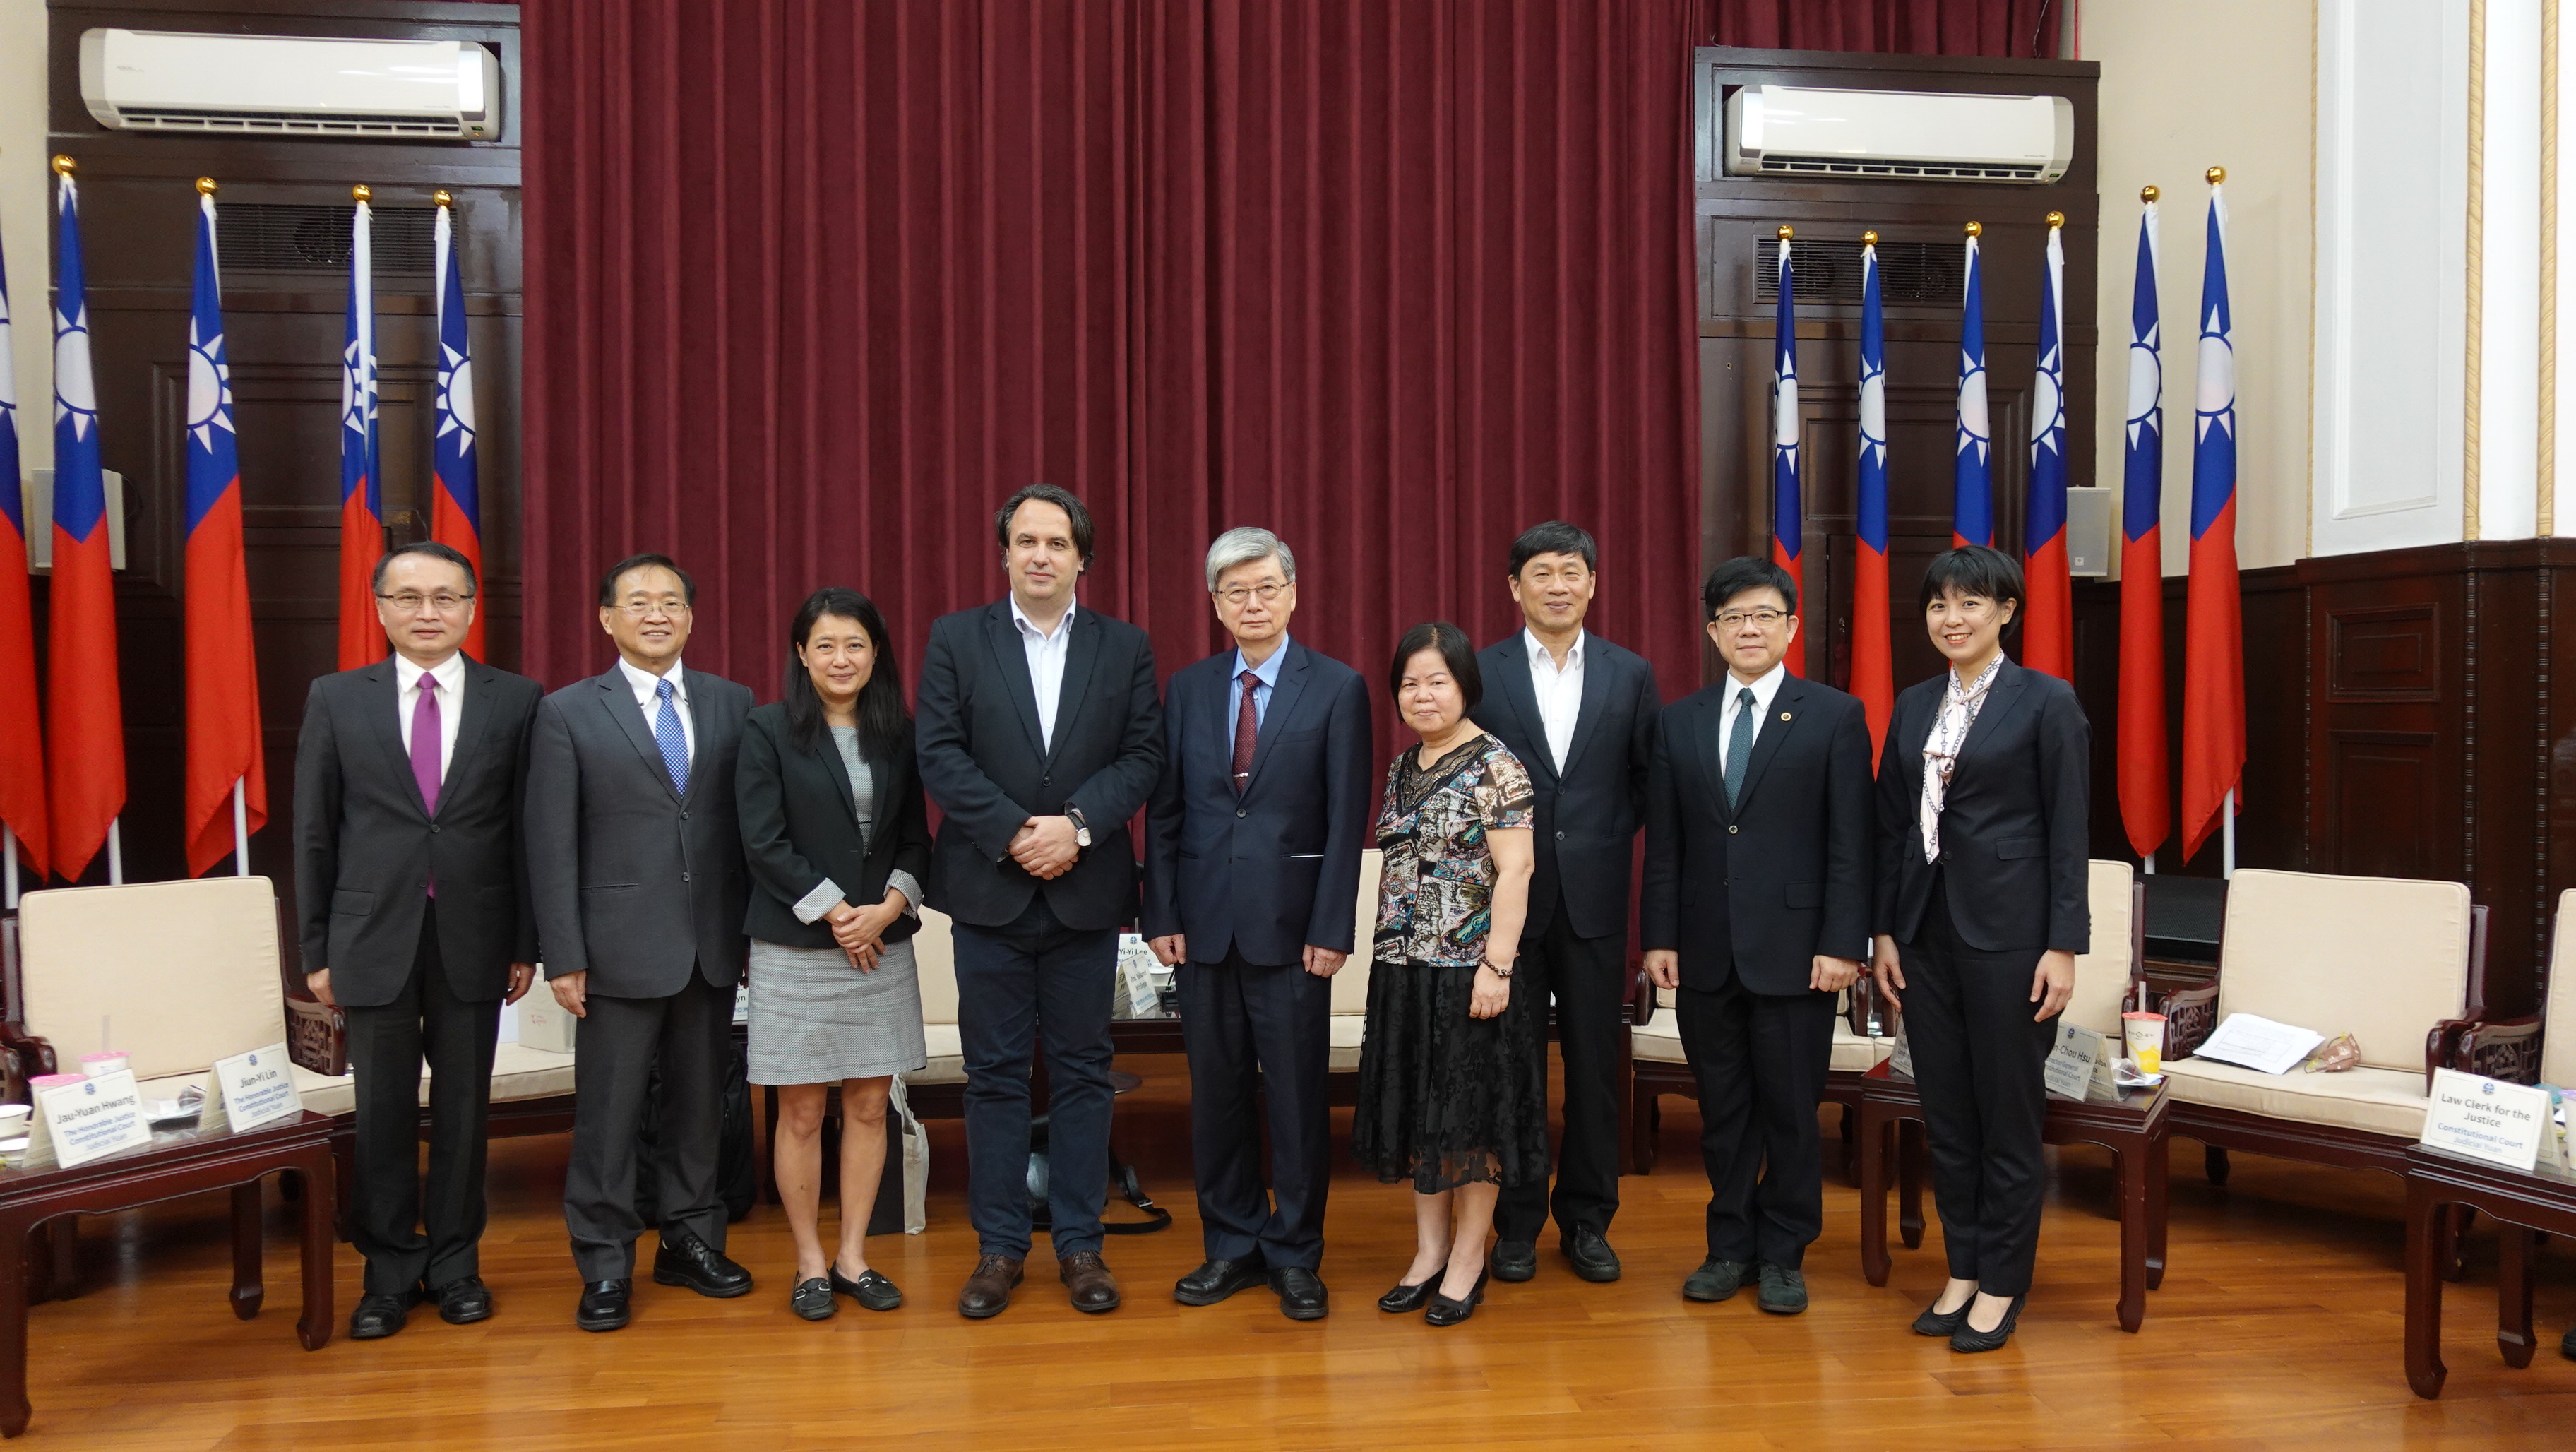 The visit of Dr. Valsamis Mitsilegas and Dr. Jaclyn L. Neo at the Judicial Yuan.